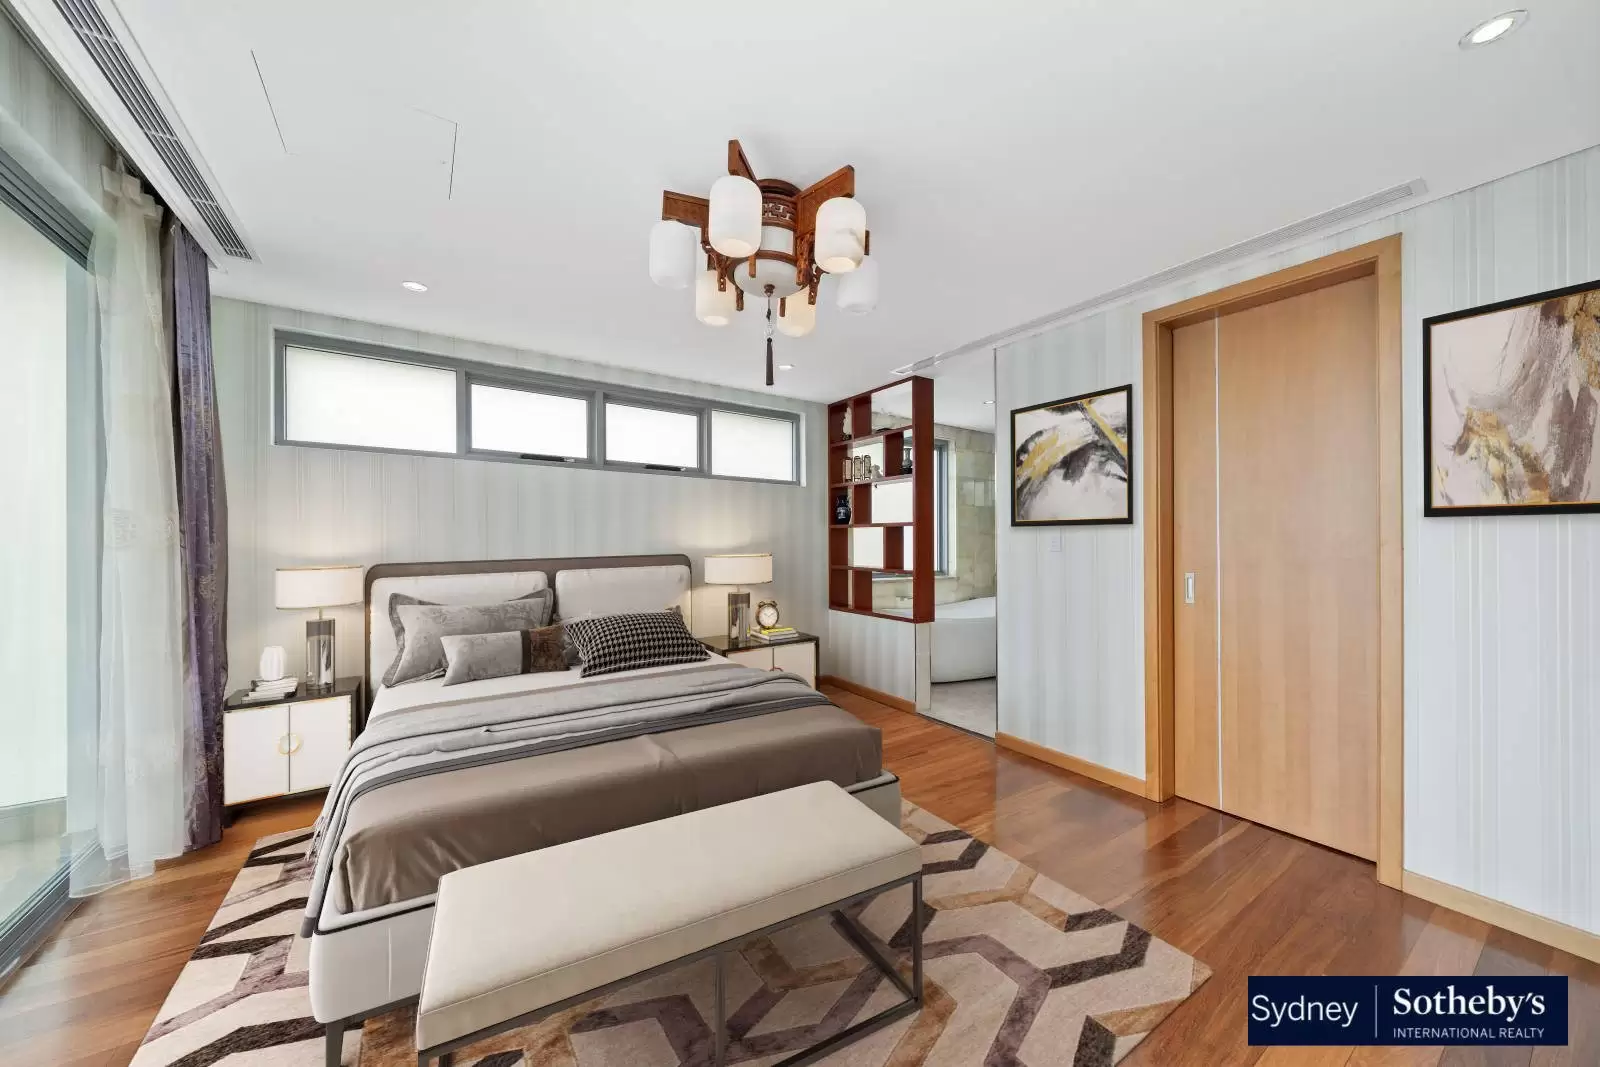 Photo #5: 43 Central Avenue, Mosman - Leased by Sydney Sotheby's International Realty